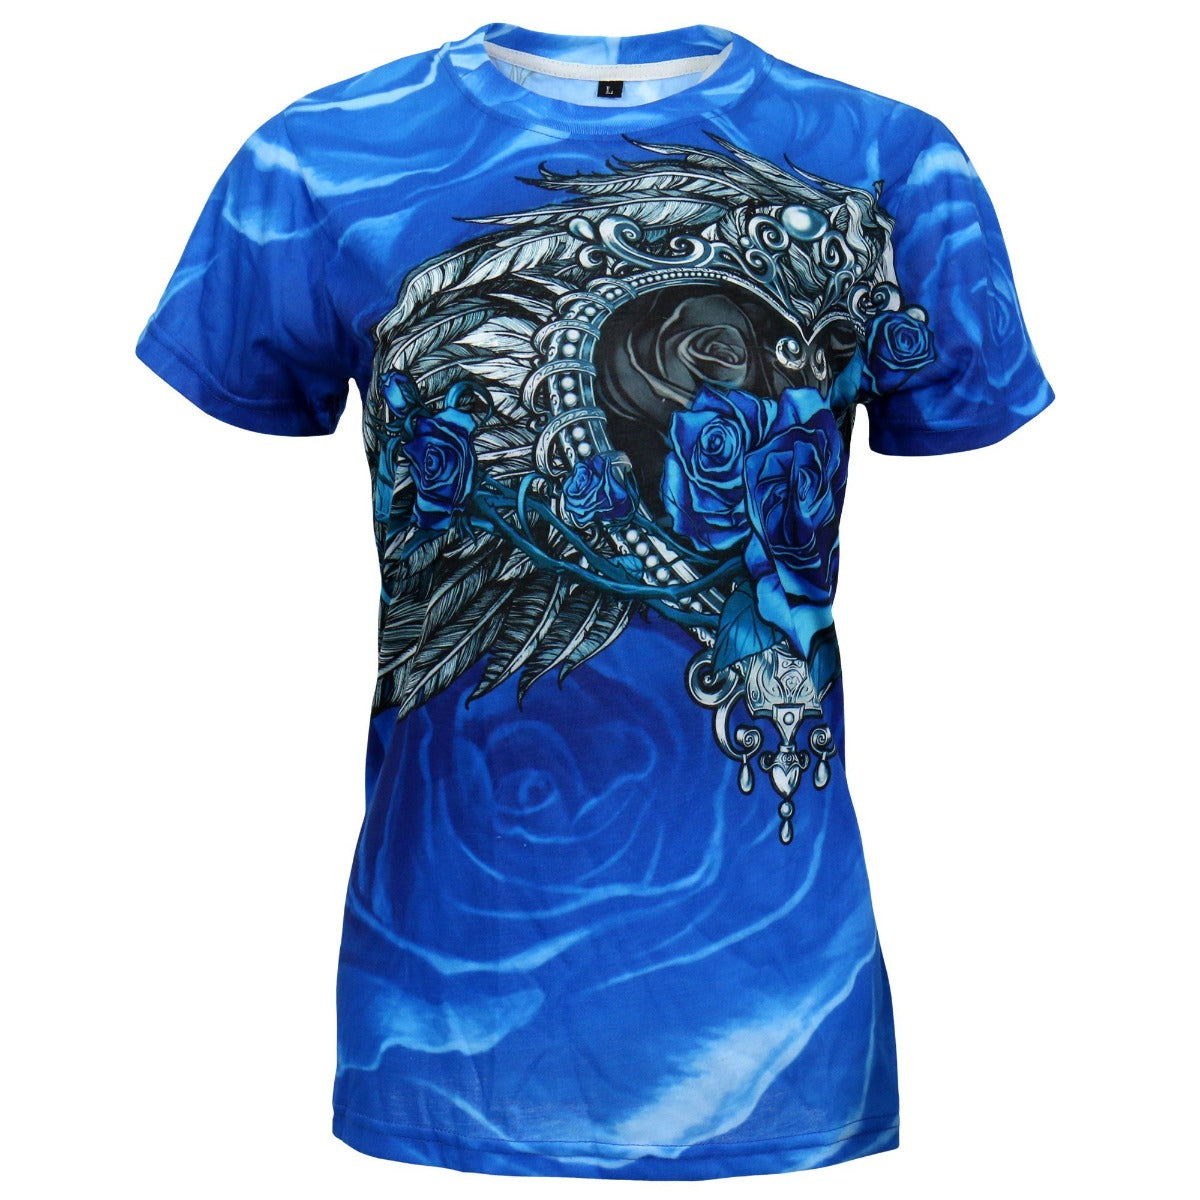 Hot Leathers Ladies Angel Roses Sublimation T-Shirt